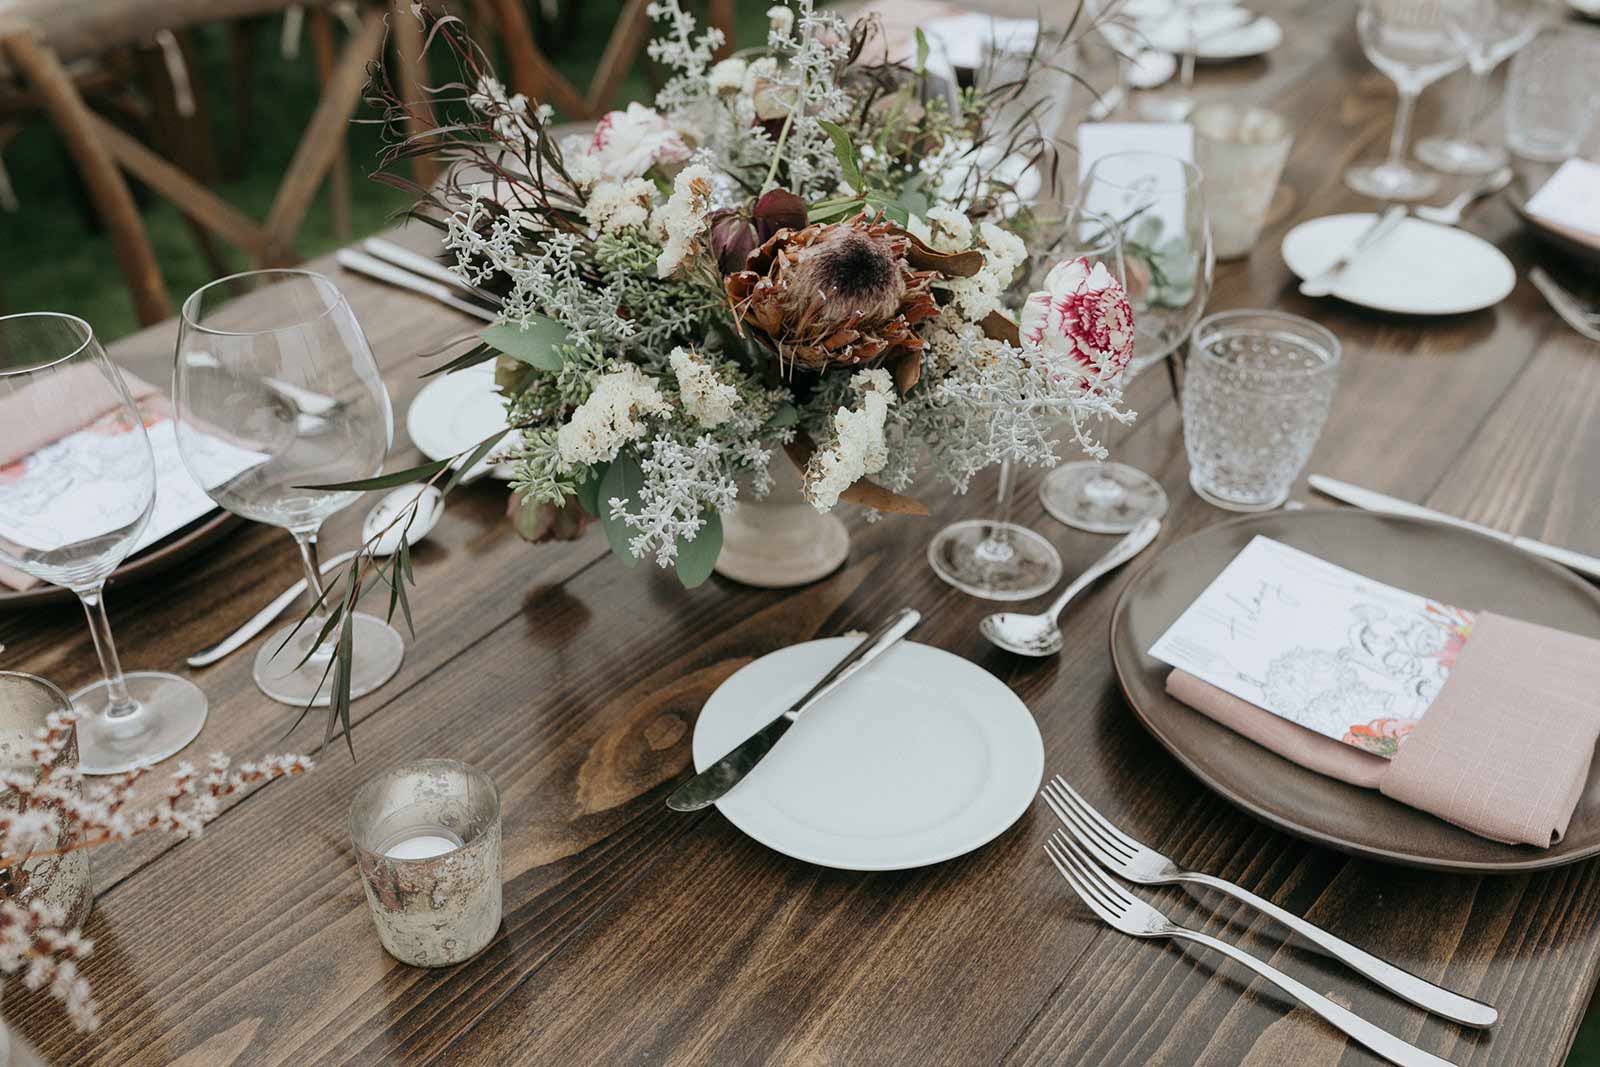 a dried and fresh flower arrangement on a wedding table